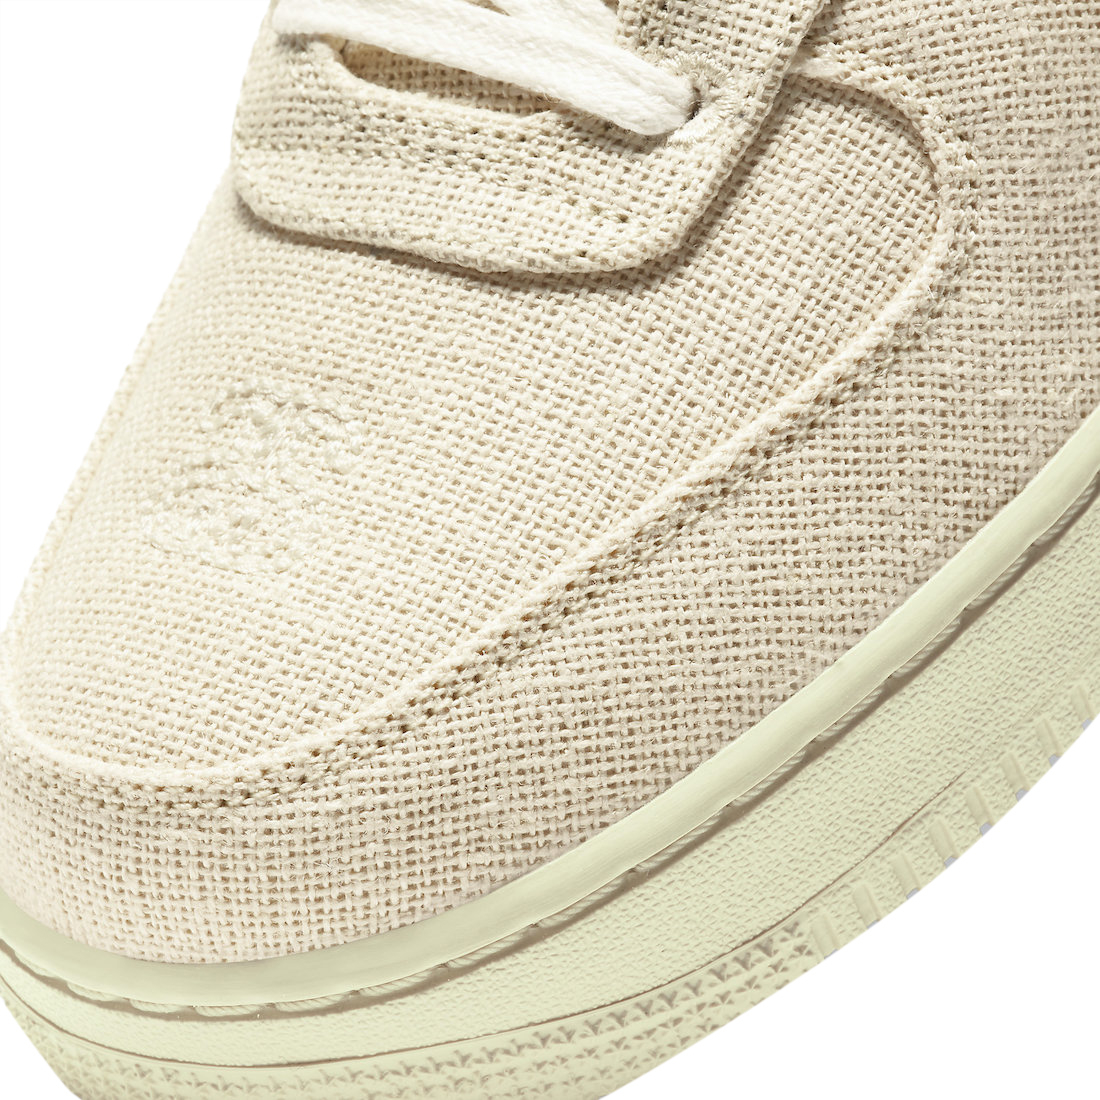 Buy Stussy x Air Force 1 Low 'Fossil' - CZ9084 200